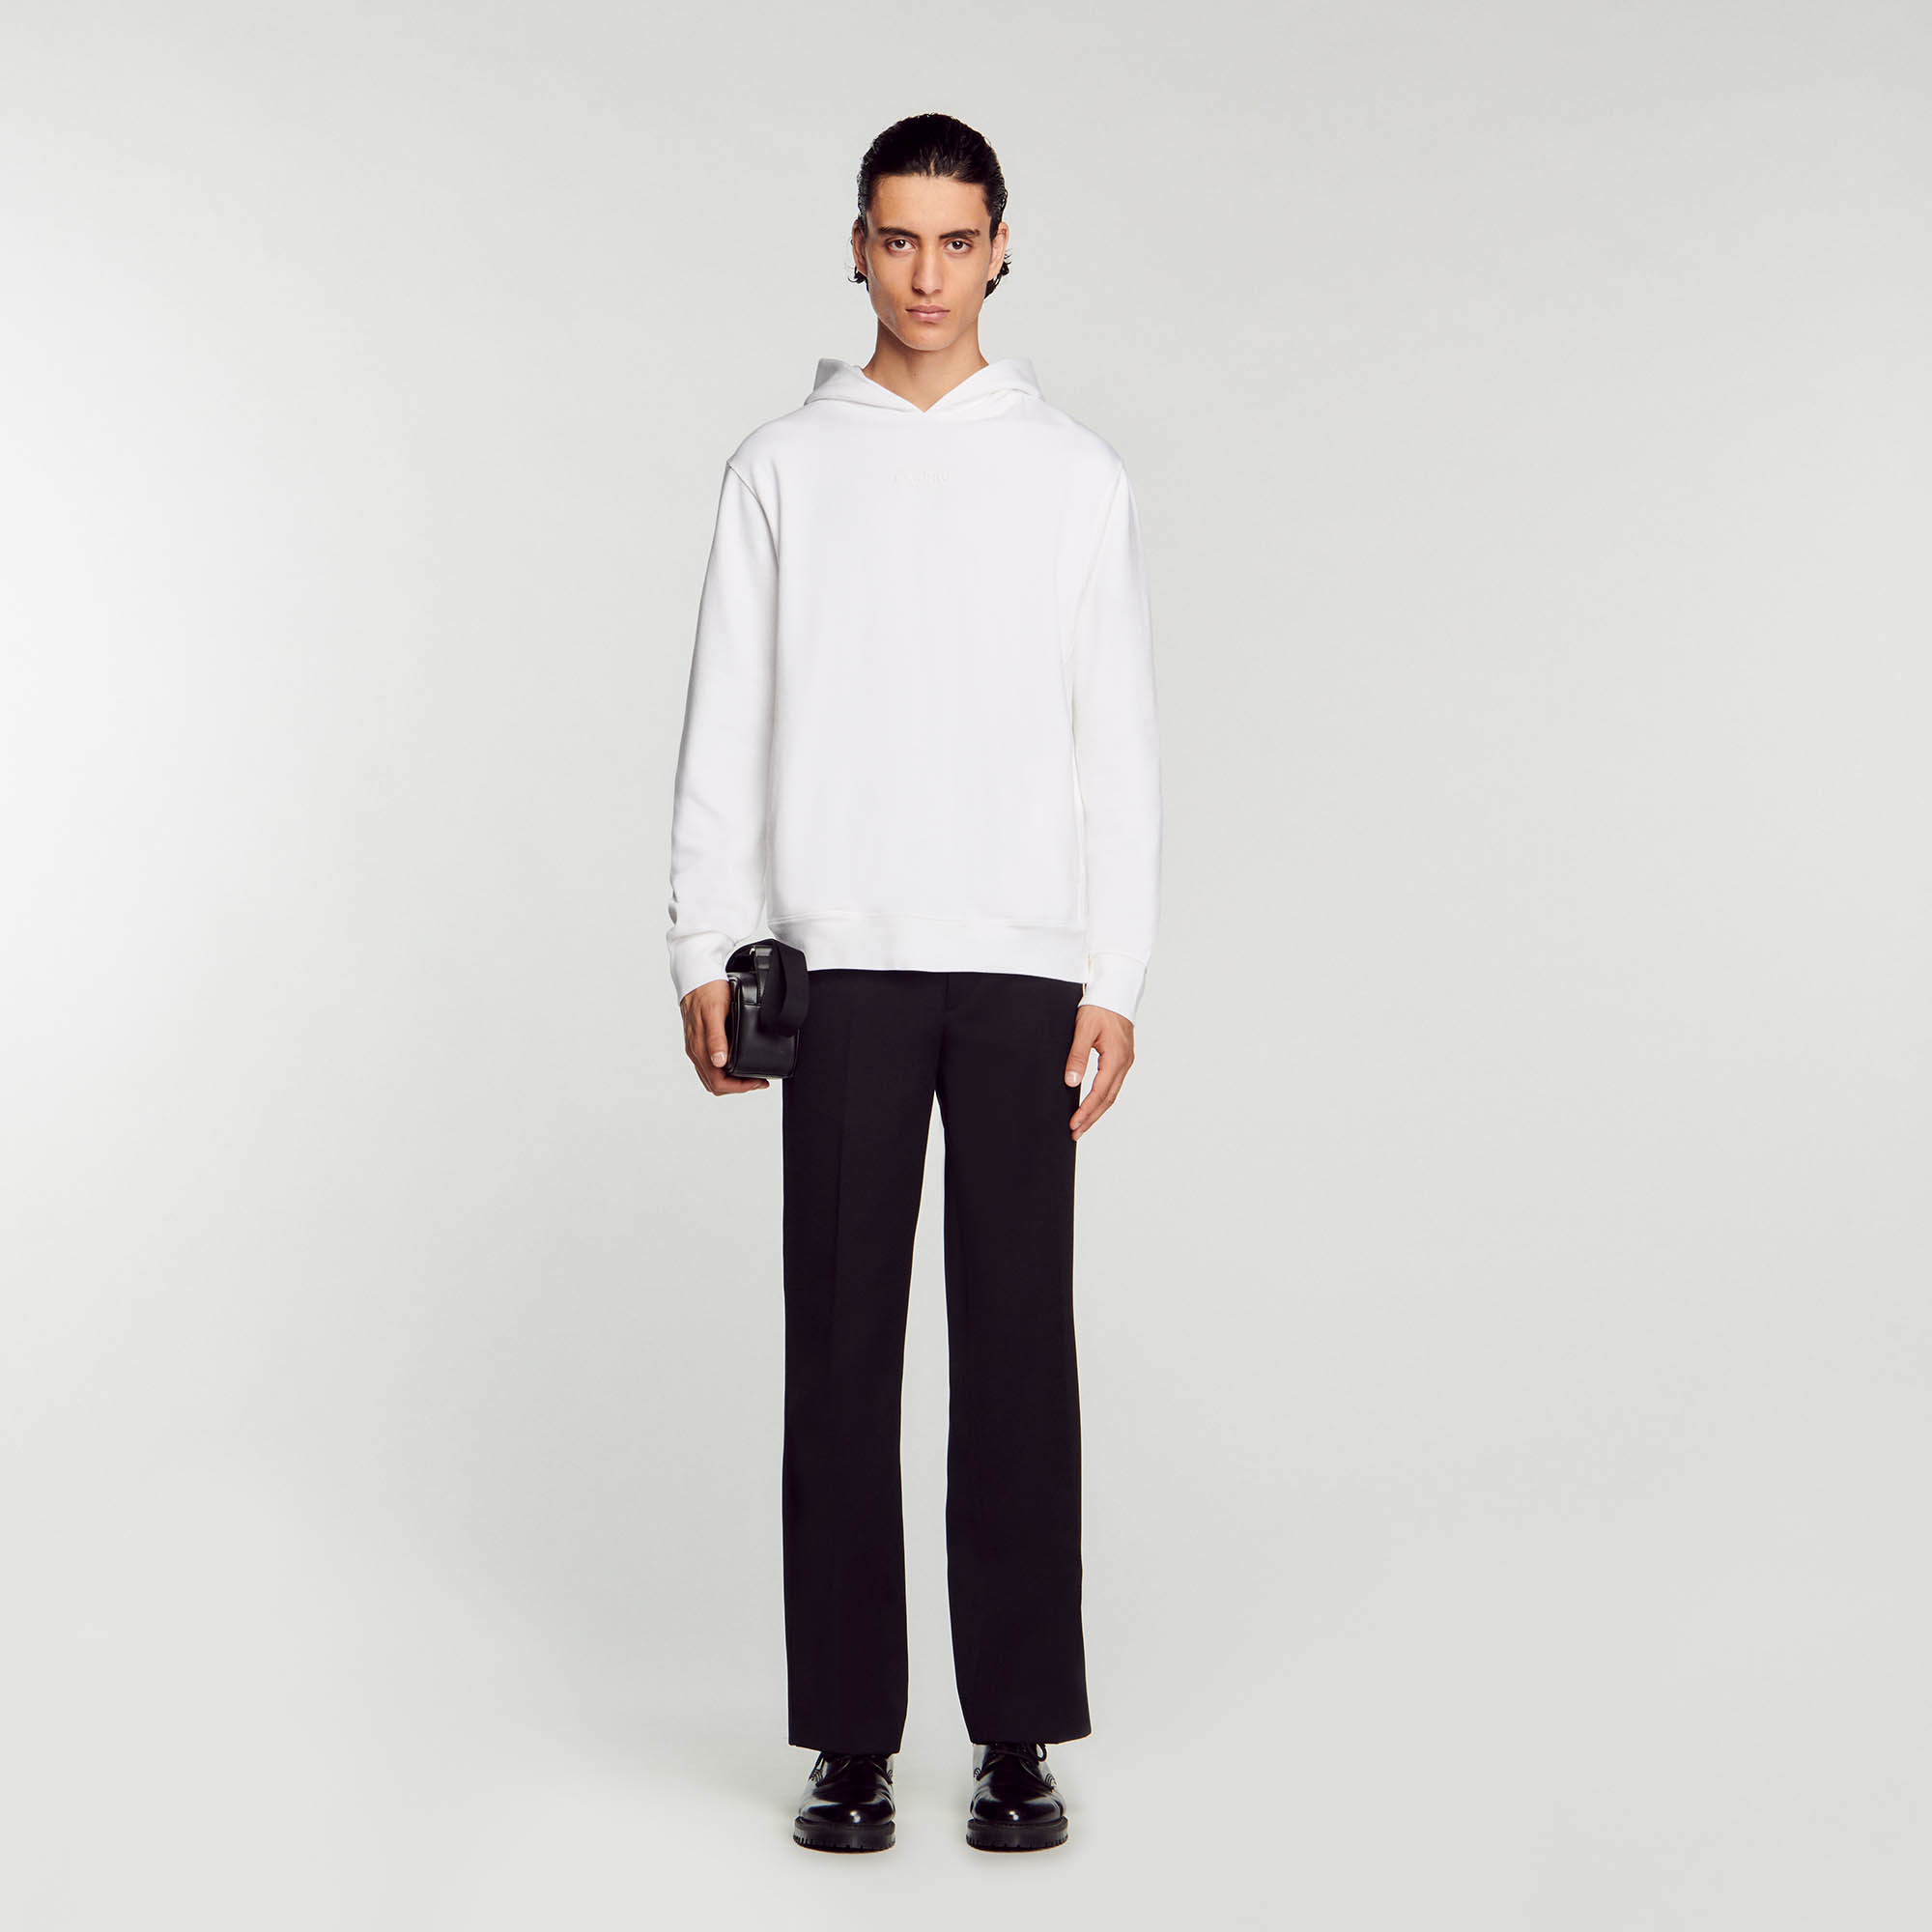 Sandro cotton Rib: Long-sleeved hooded sweatshirt decorated with the Sandro logo in rubber on the front